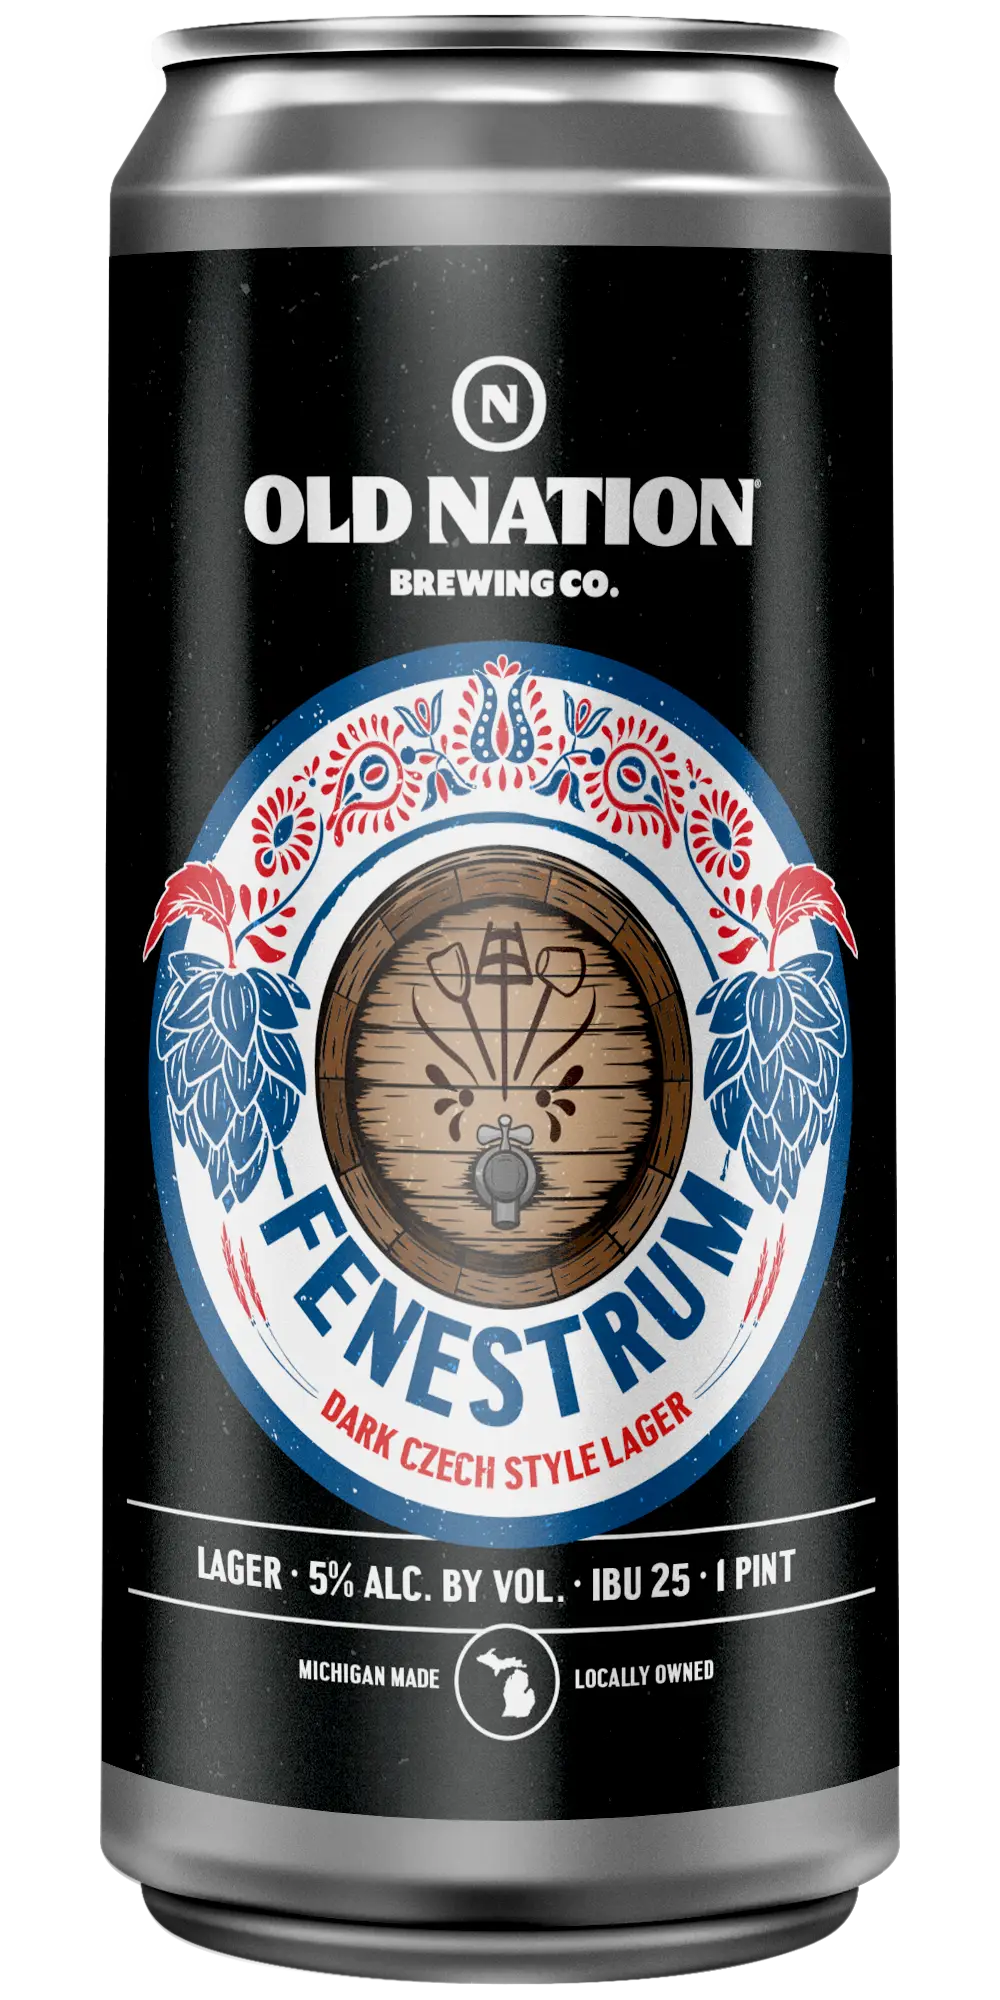 Old Nation Fenestrum beer in an aluminum can. Drawing of beer barrel with hops on the can label.